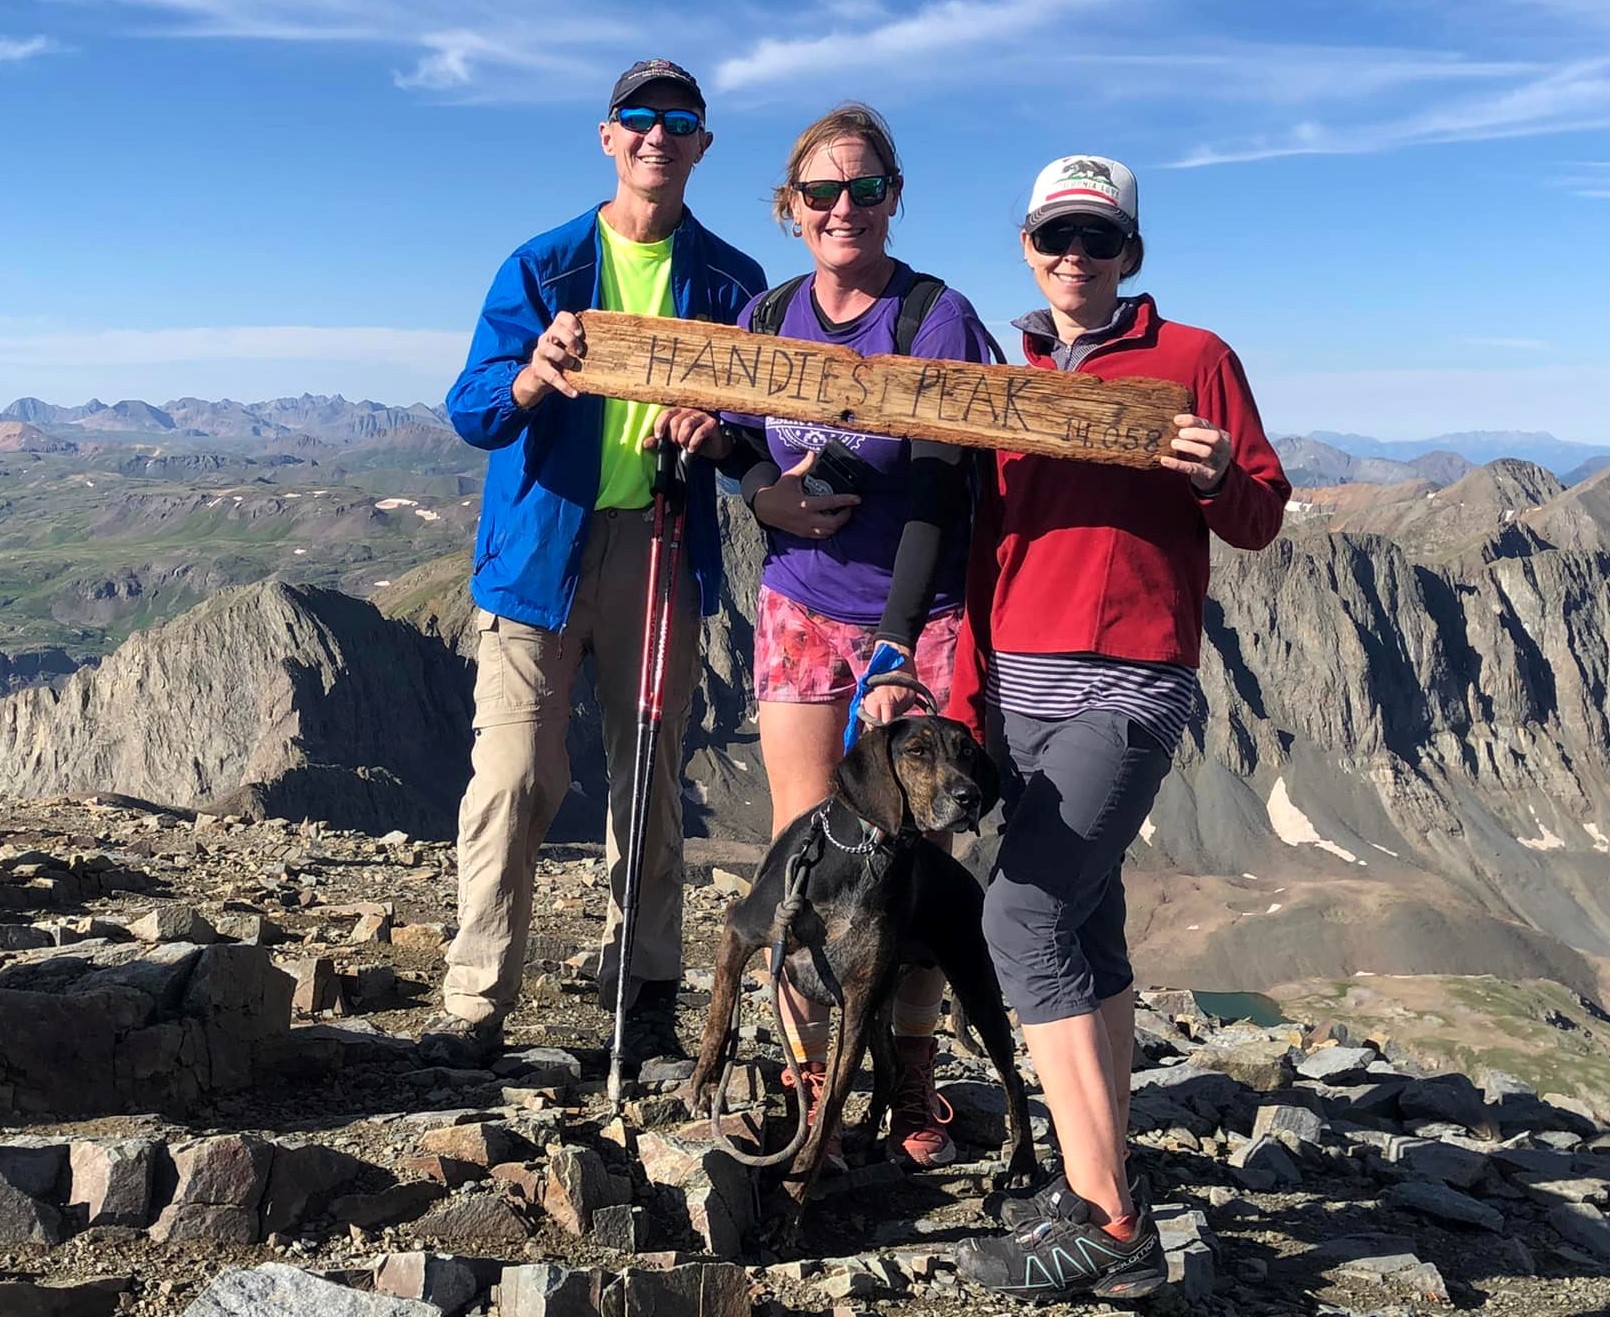 The foursome reaching the summit of Handies Peak to spread some of the ashes of their dearly departed Daisy Mae with her Plott Hound understudy Waylon are (R-L) Glenn Heumann, Laurel Darren and Lydia McNesse.